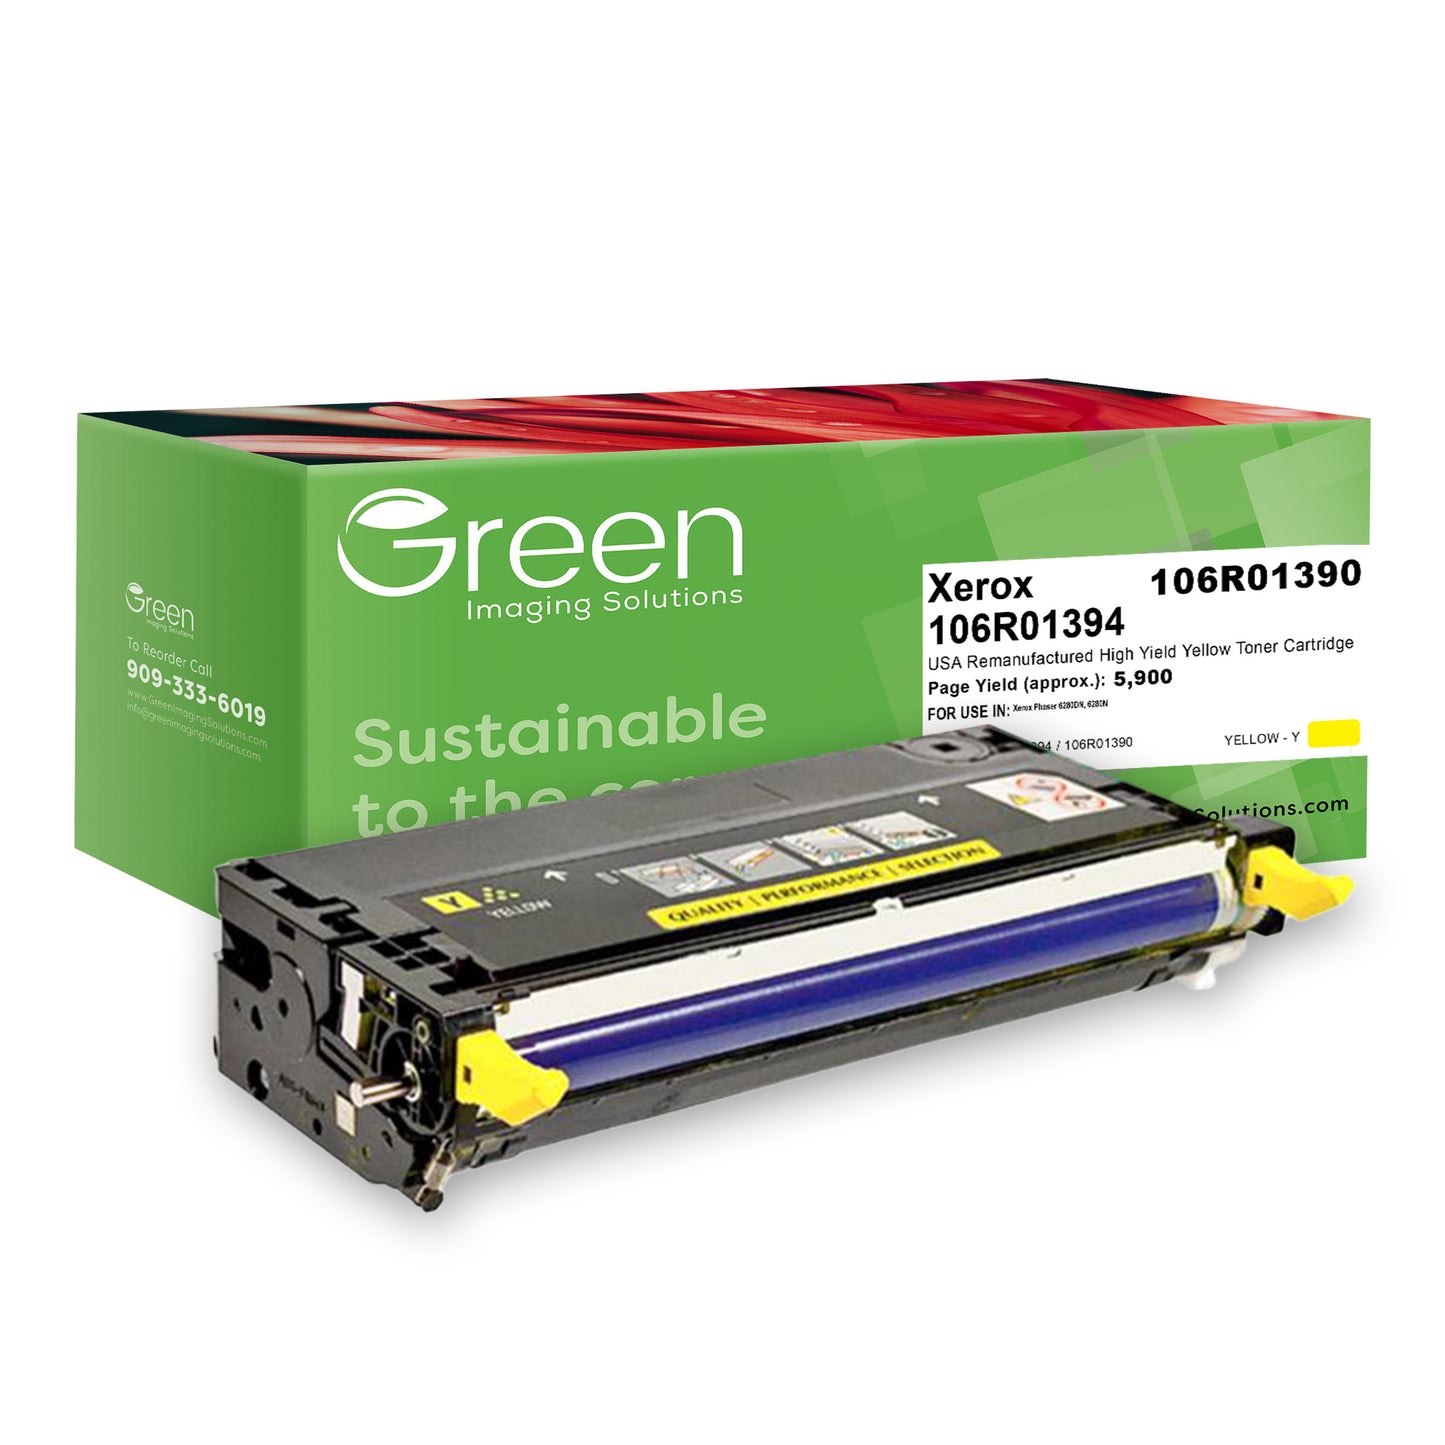 Green Imaging Solutions USA Remanufactured High Yield Yellow Toner Cartridge for Xerox 106R01394/106R01390